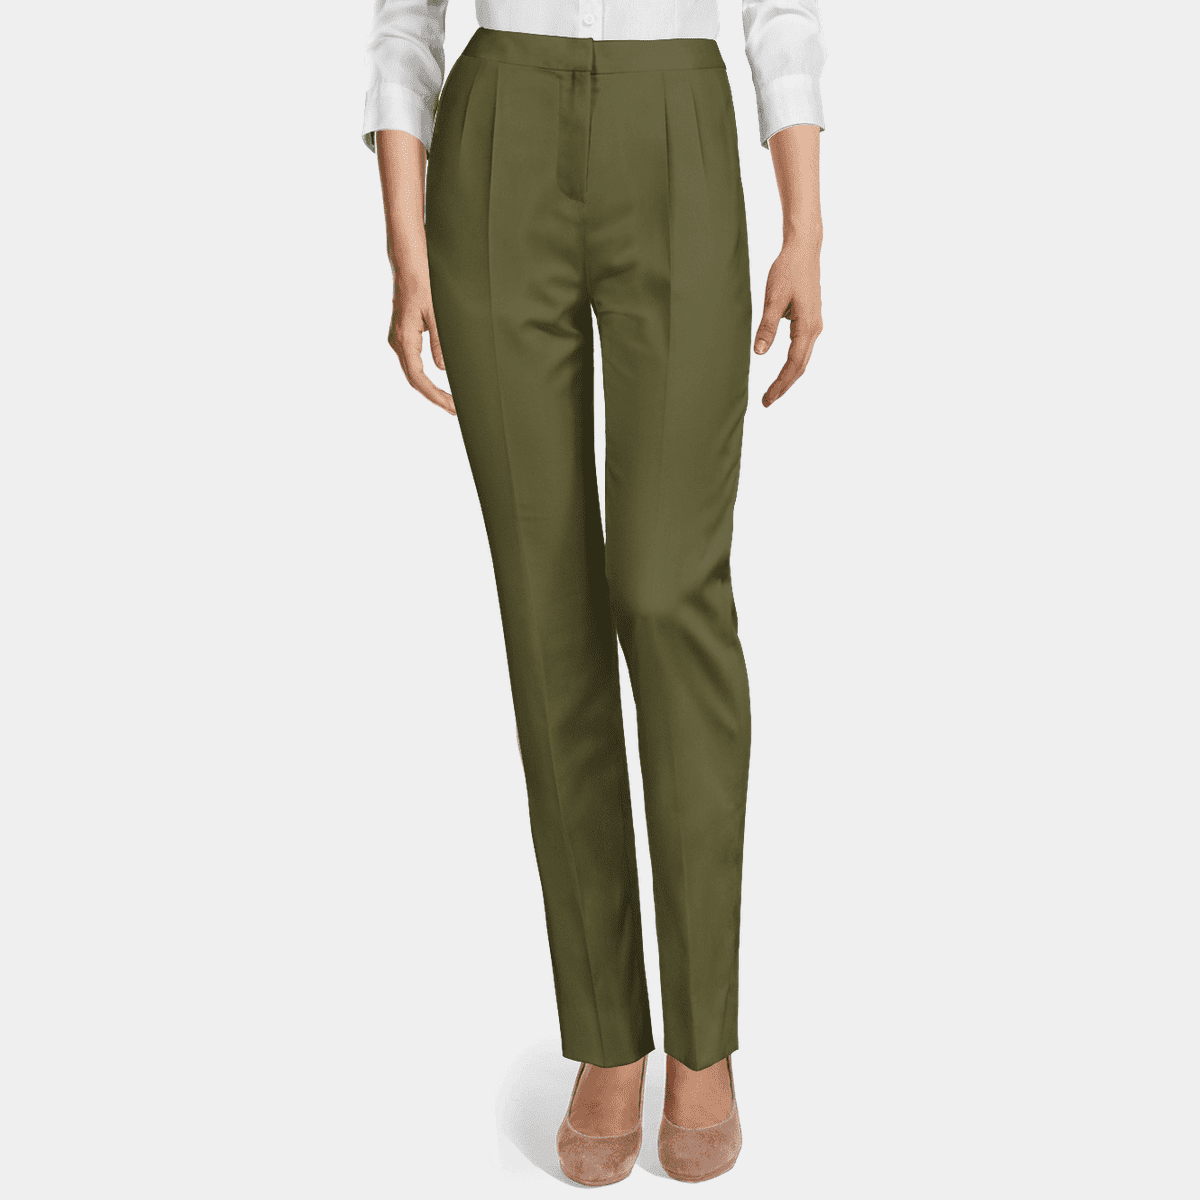 Army Green stretch high waisted pleated Women Dress Trouser 69€ | Sumissura